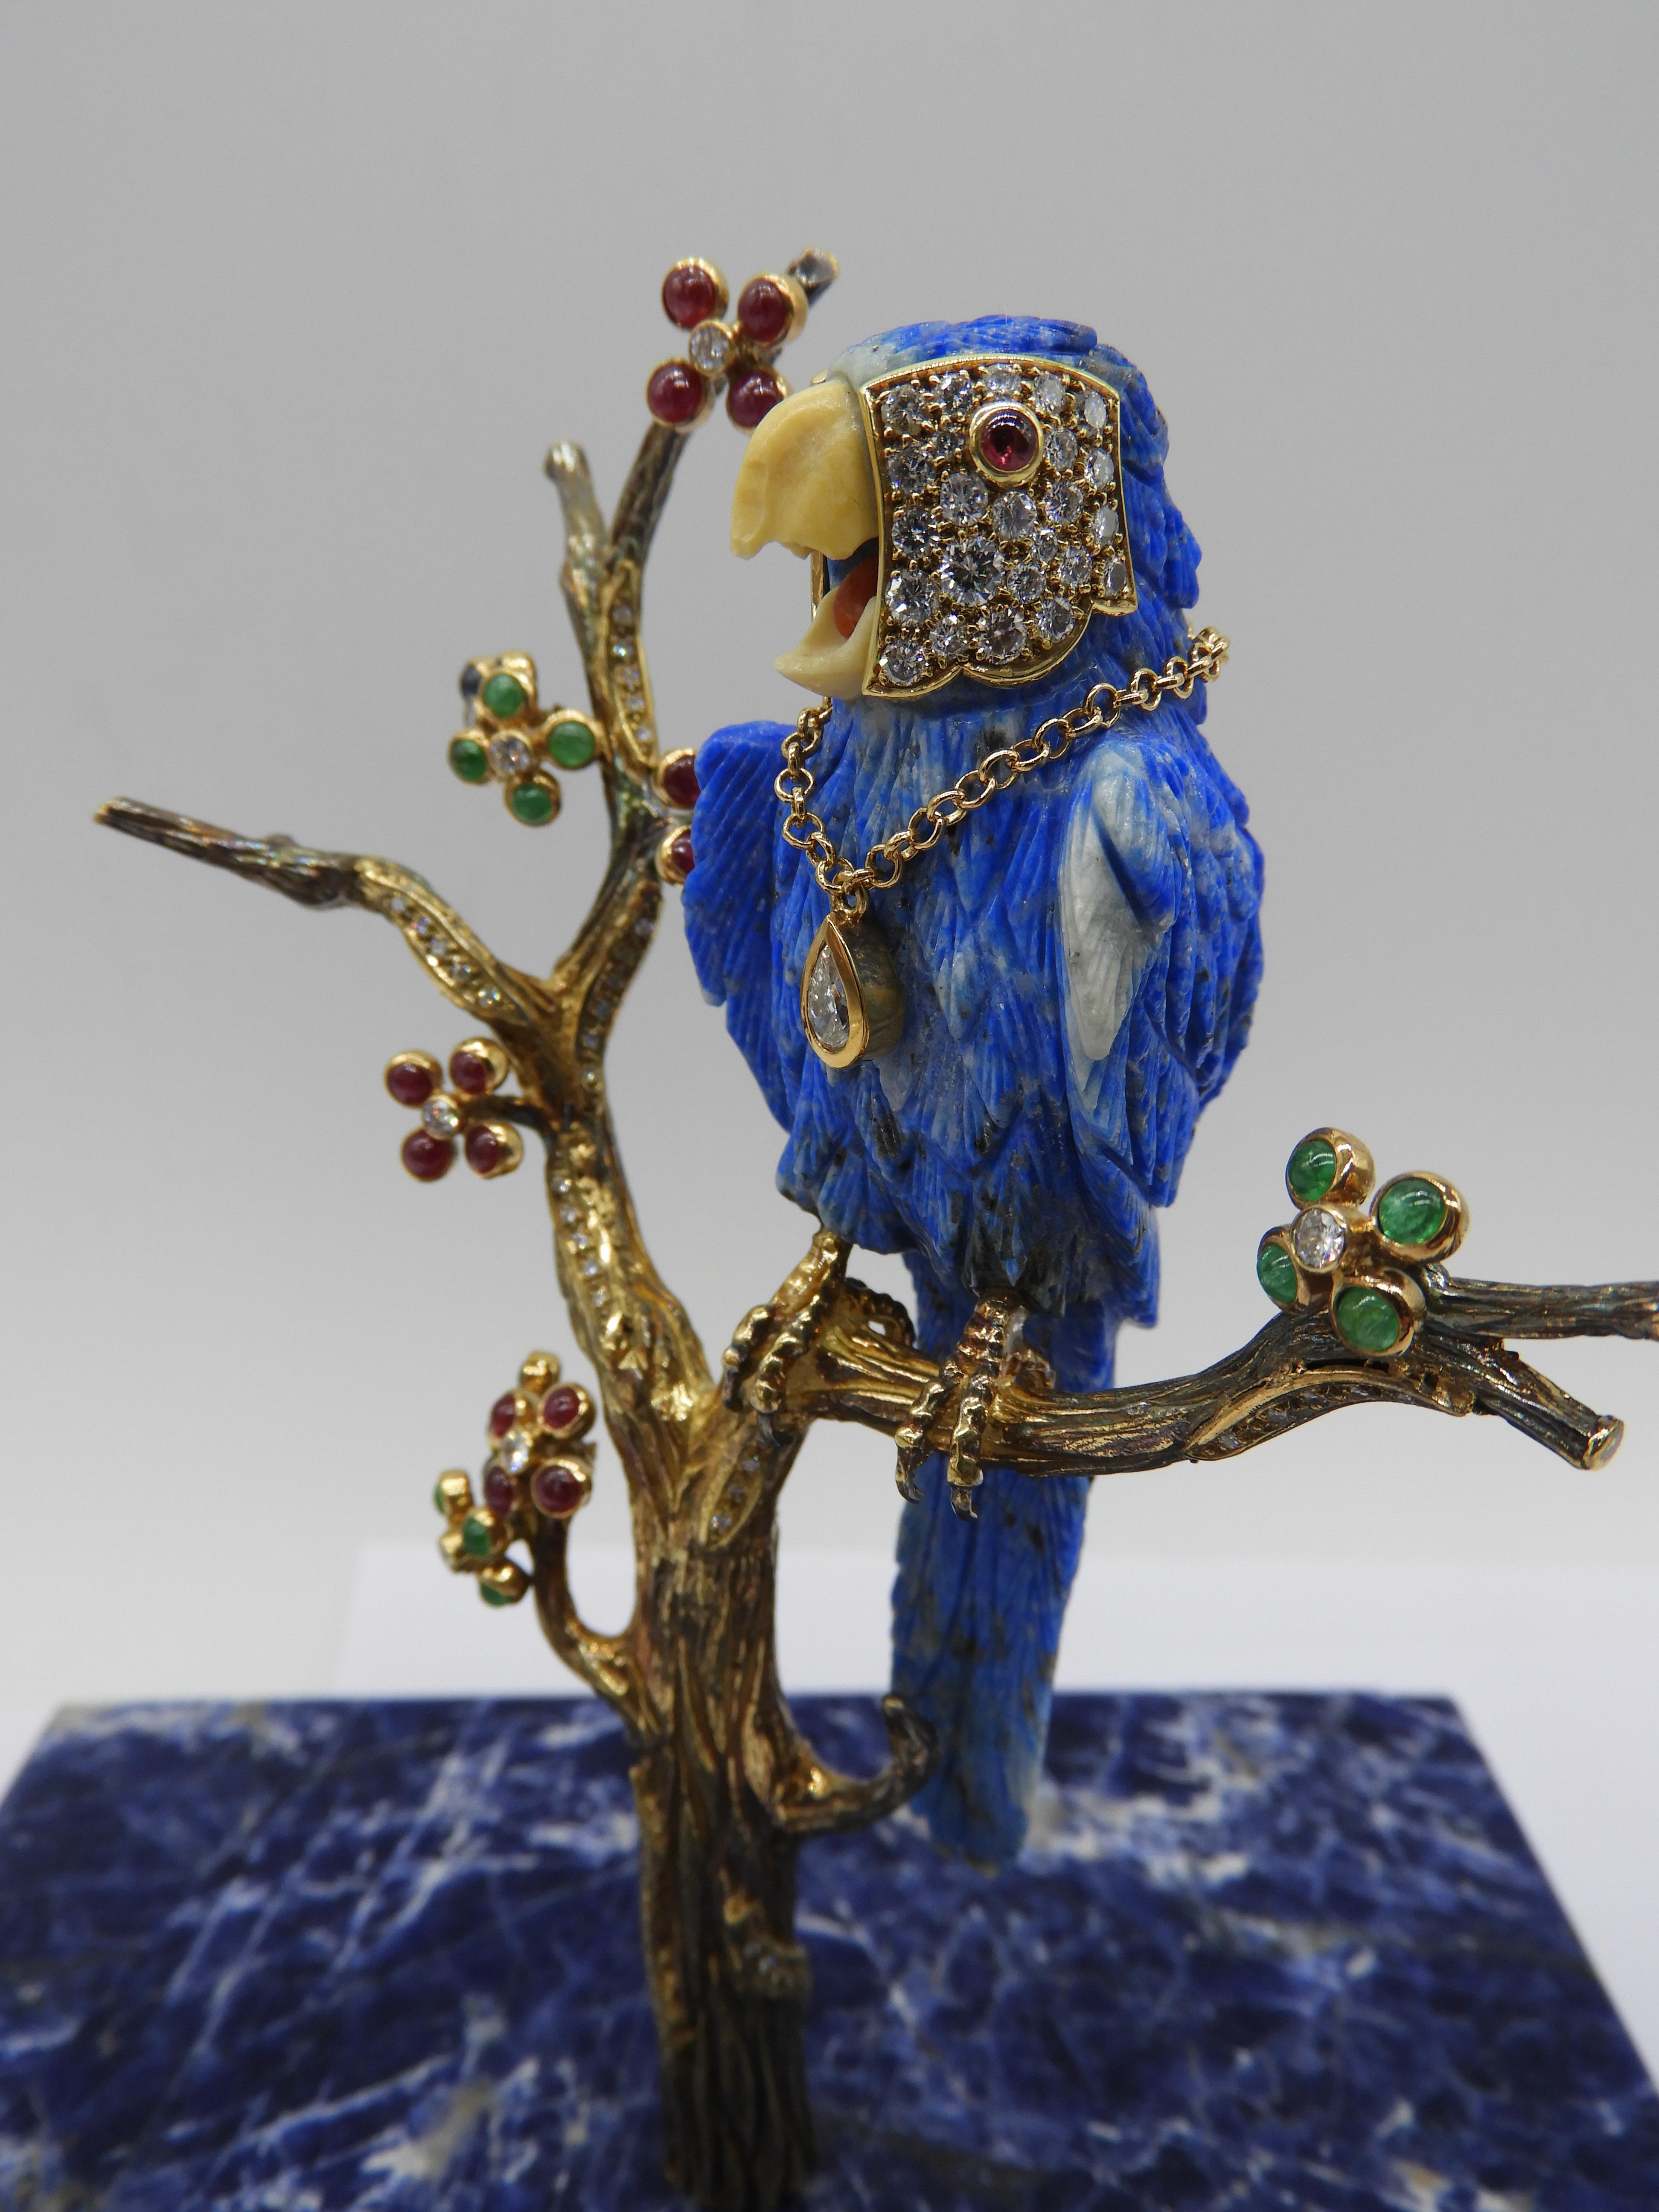 Beautiful happy and vibrant macaw in 18k gold, diamonds and lapislazuli stone standing on a branch tree made of 18k gold 
Branch tree is adorned with yellow gold, diamonds, rubies, saphires, emeralds all cabouchon cut
And the Macaw is defined with a